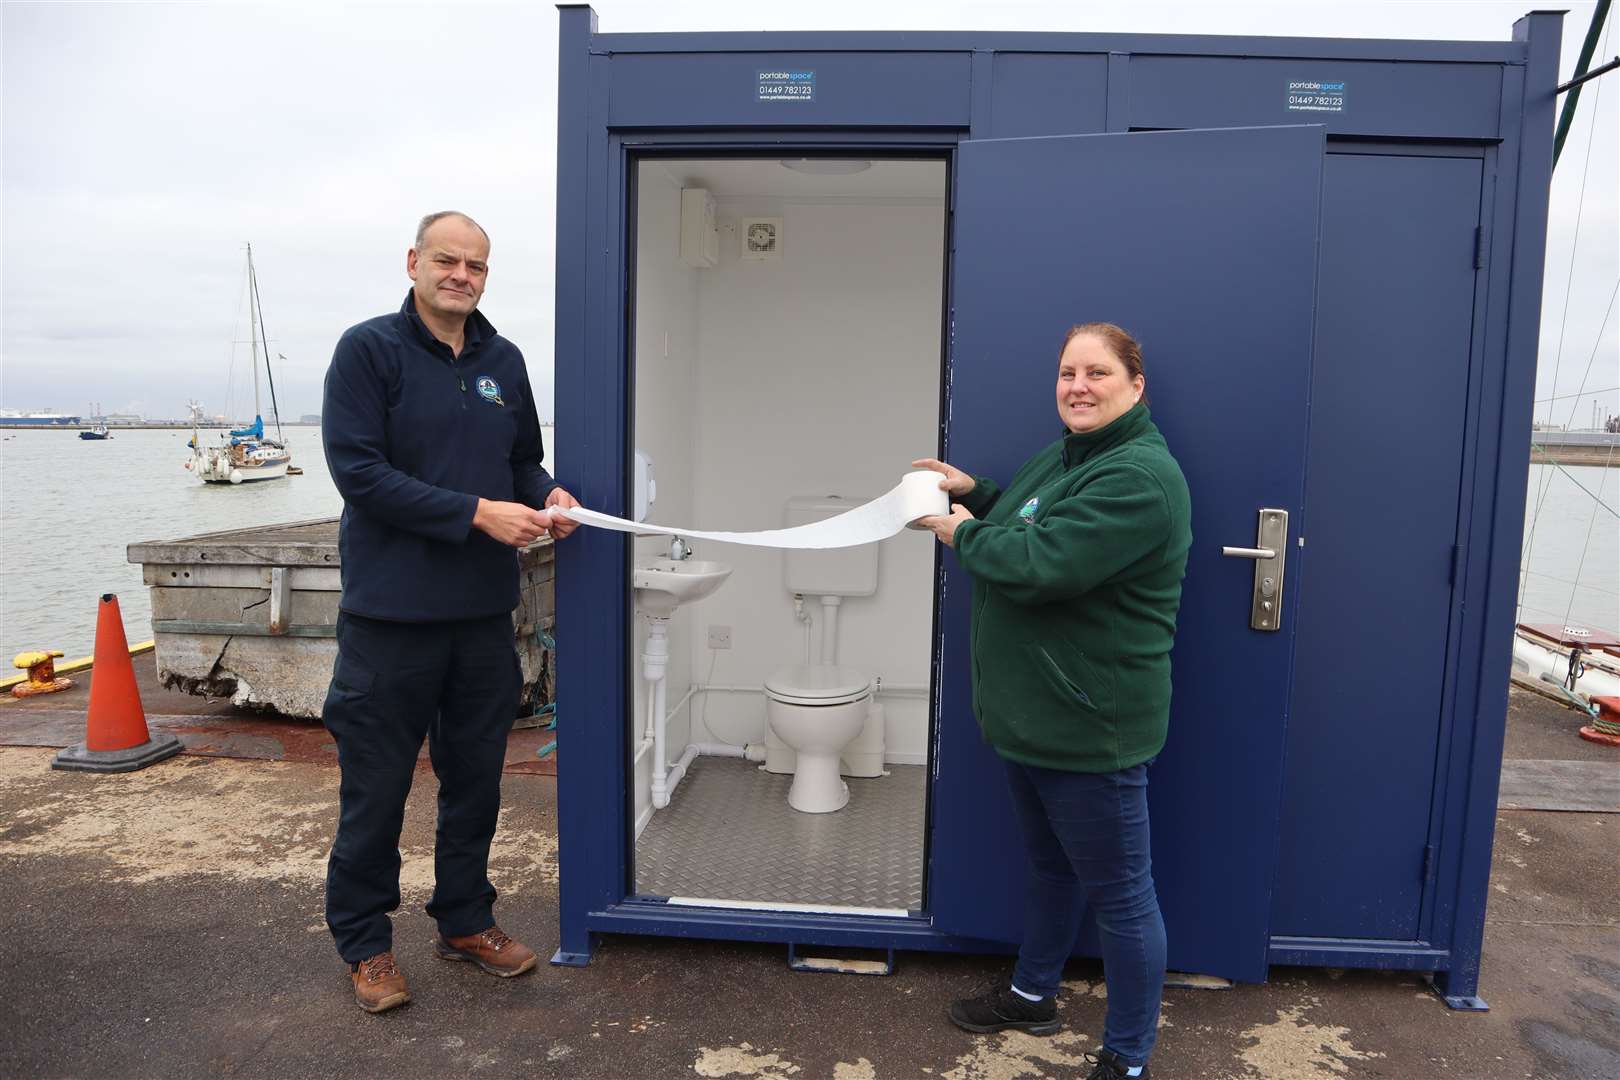 David Lavender and Rachel Collier 'baptising' the new solar loos on Queenborough Harbour's pontoon